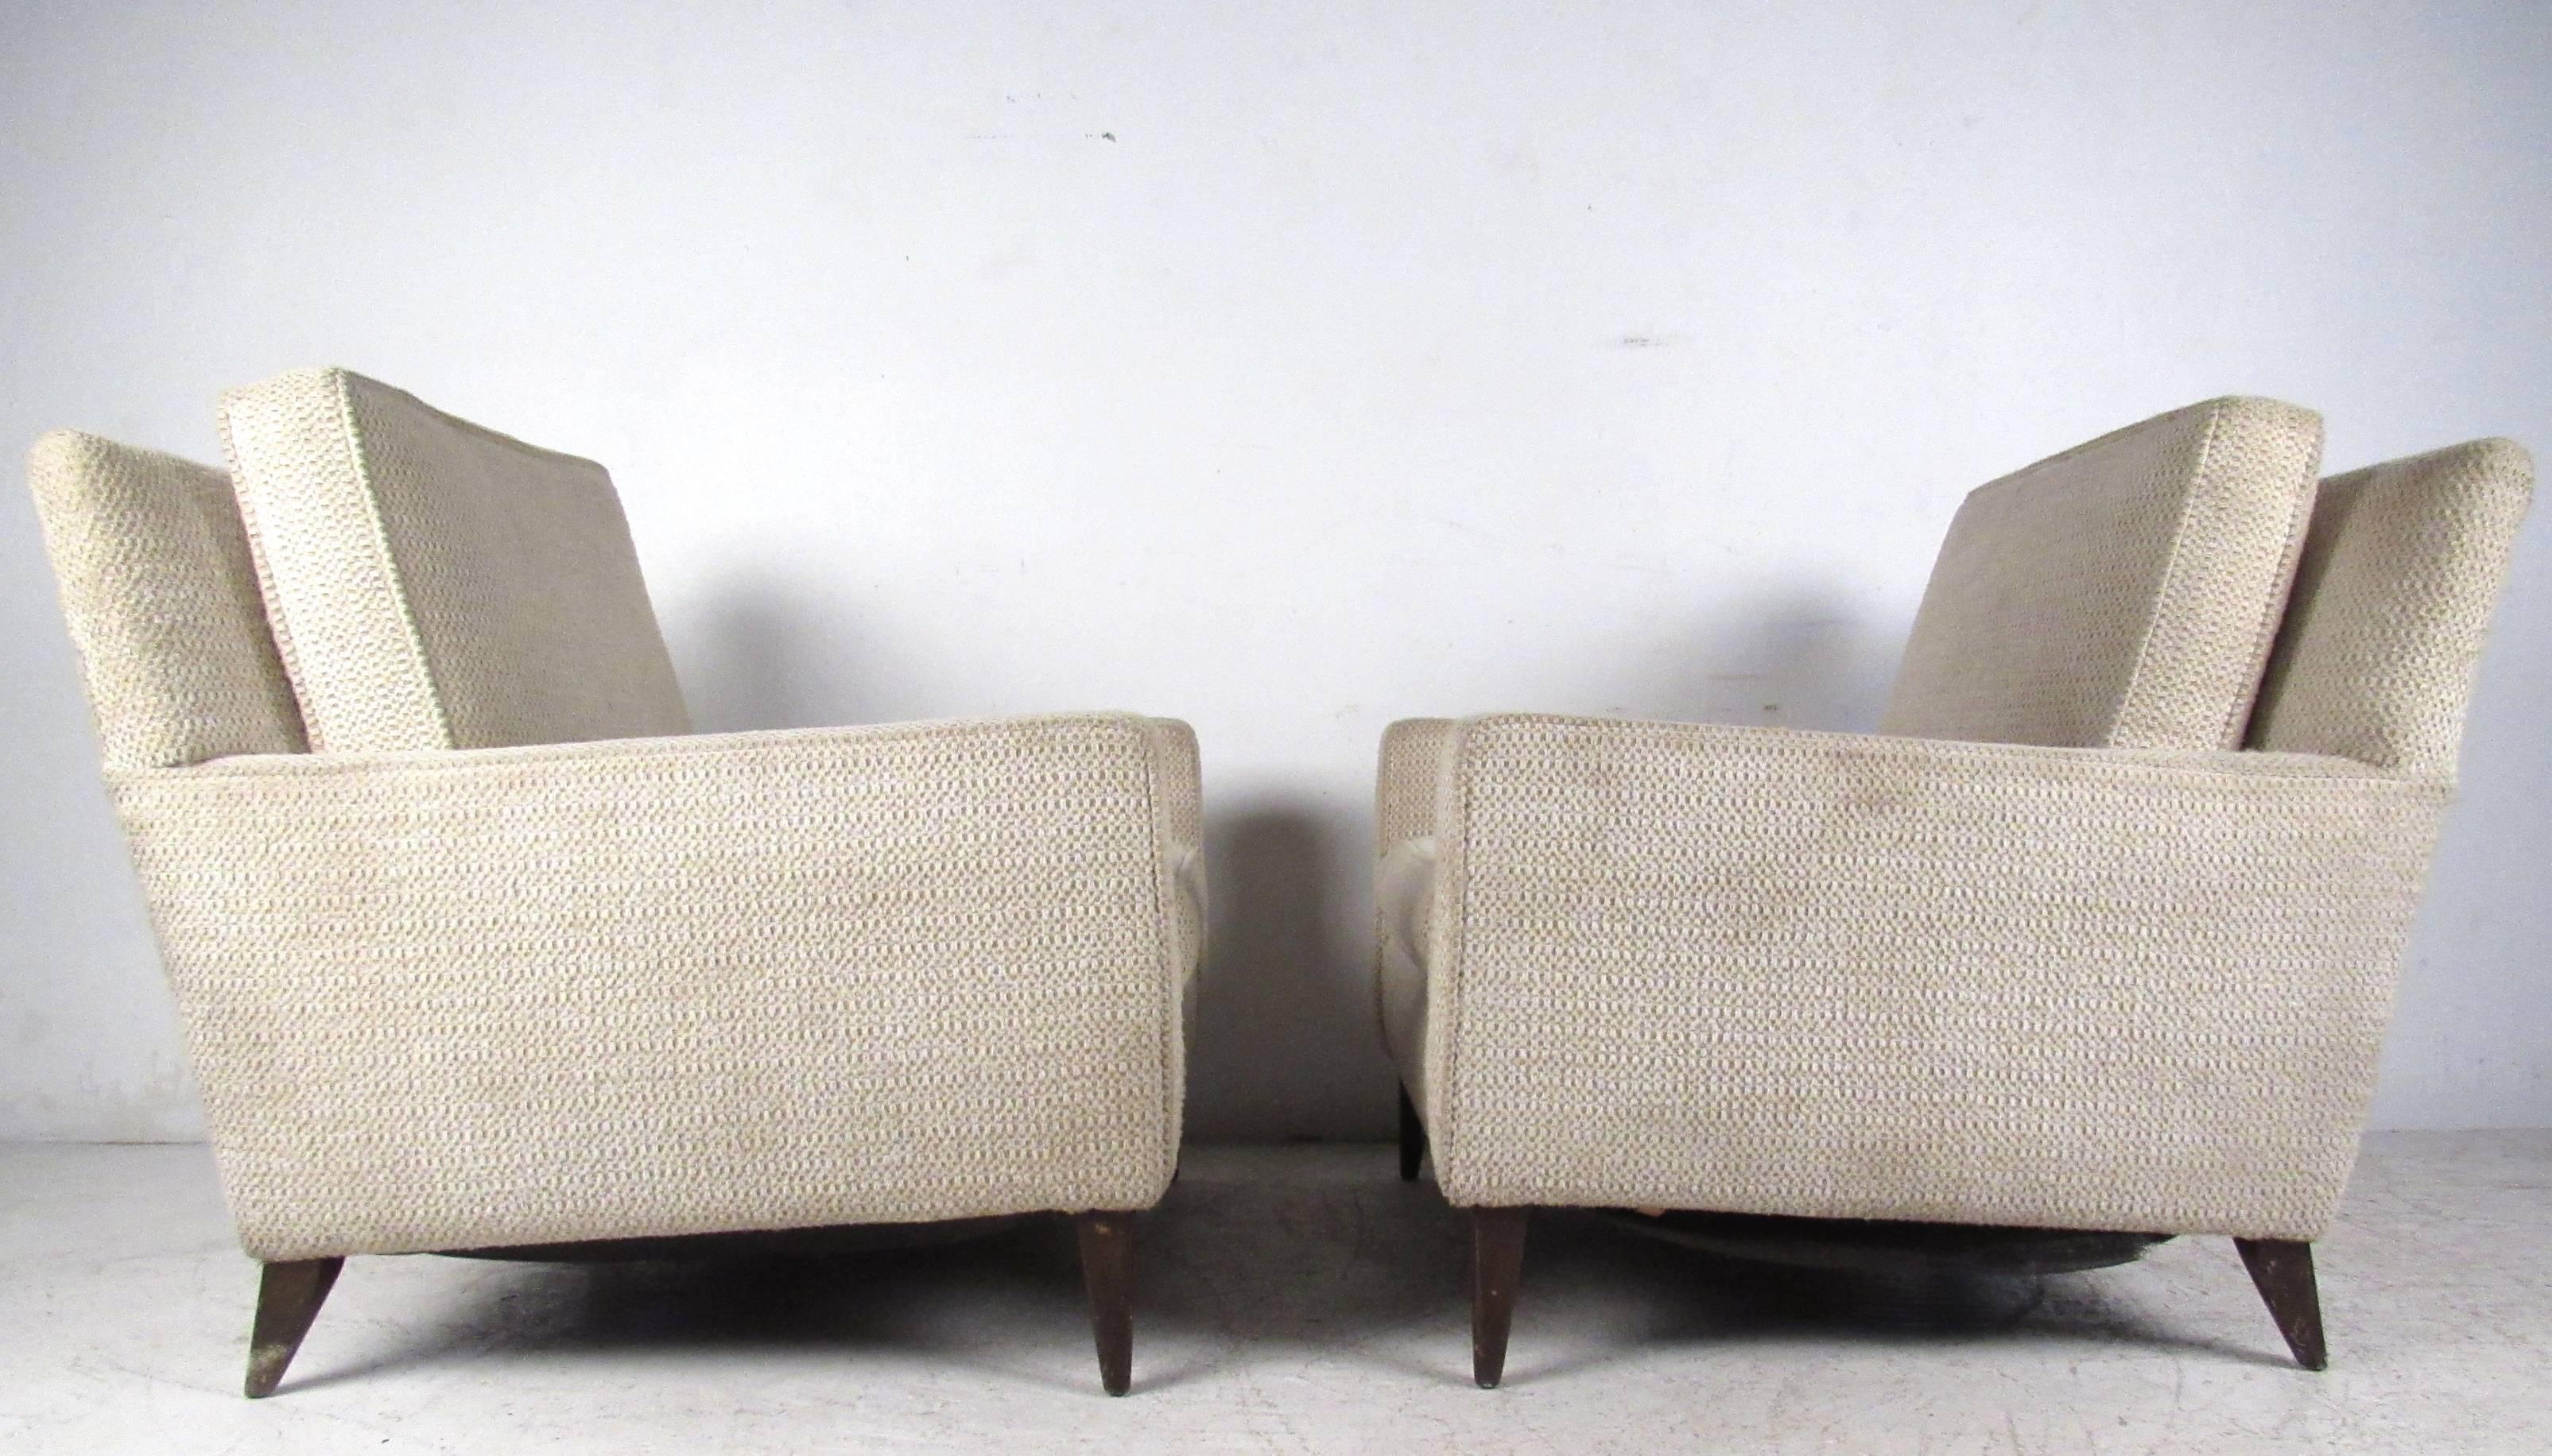 This vintage pair of upholstered lounge chairs make a practical yet stylish addition to seating in any setting. The chairs feature tapered legs, comfortable design, and mid-century charm. Please confirm item location (NY or NJ). 